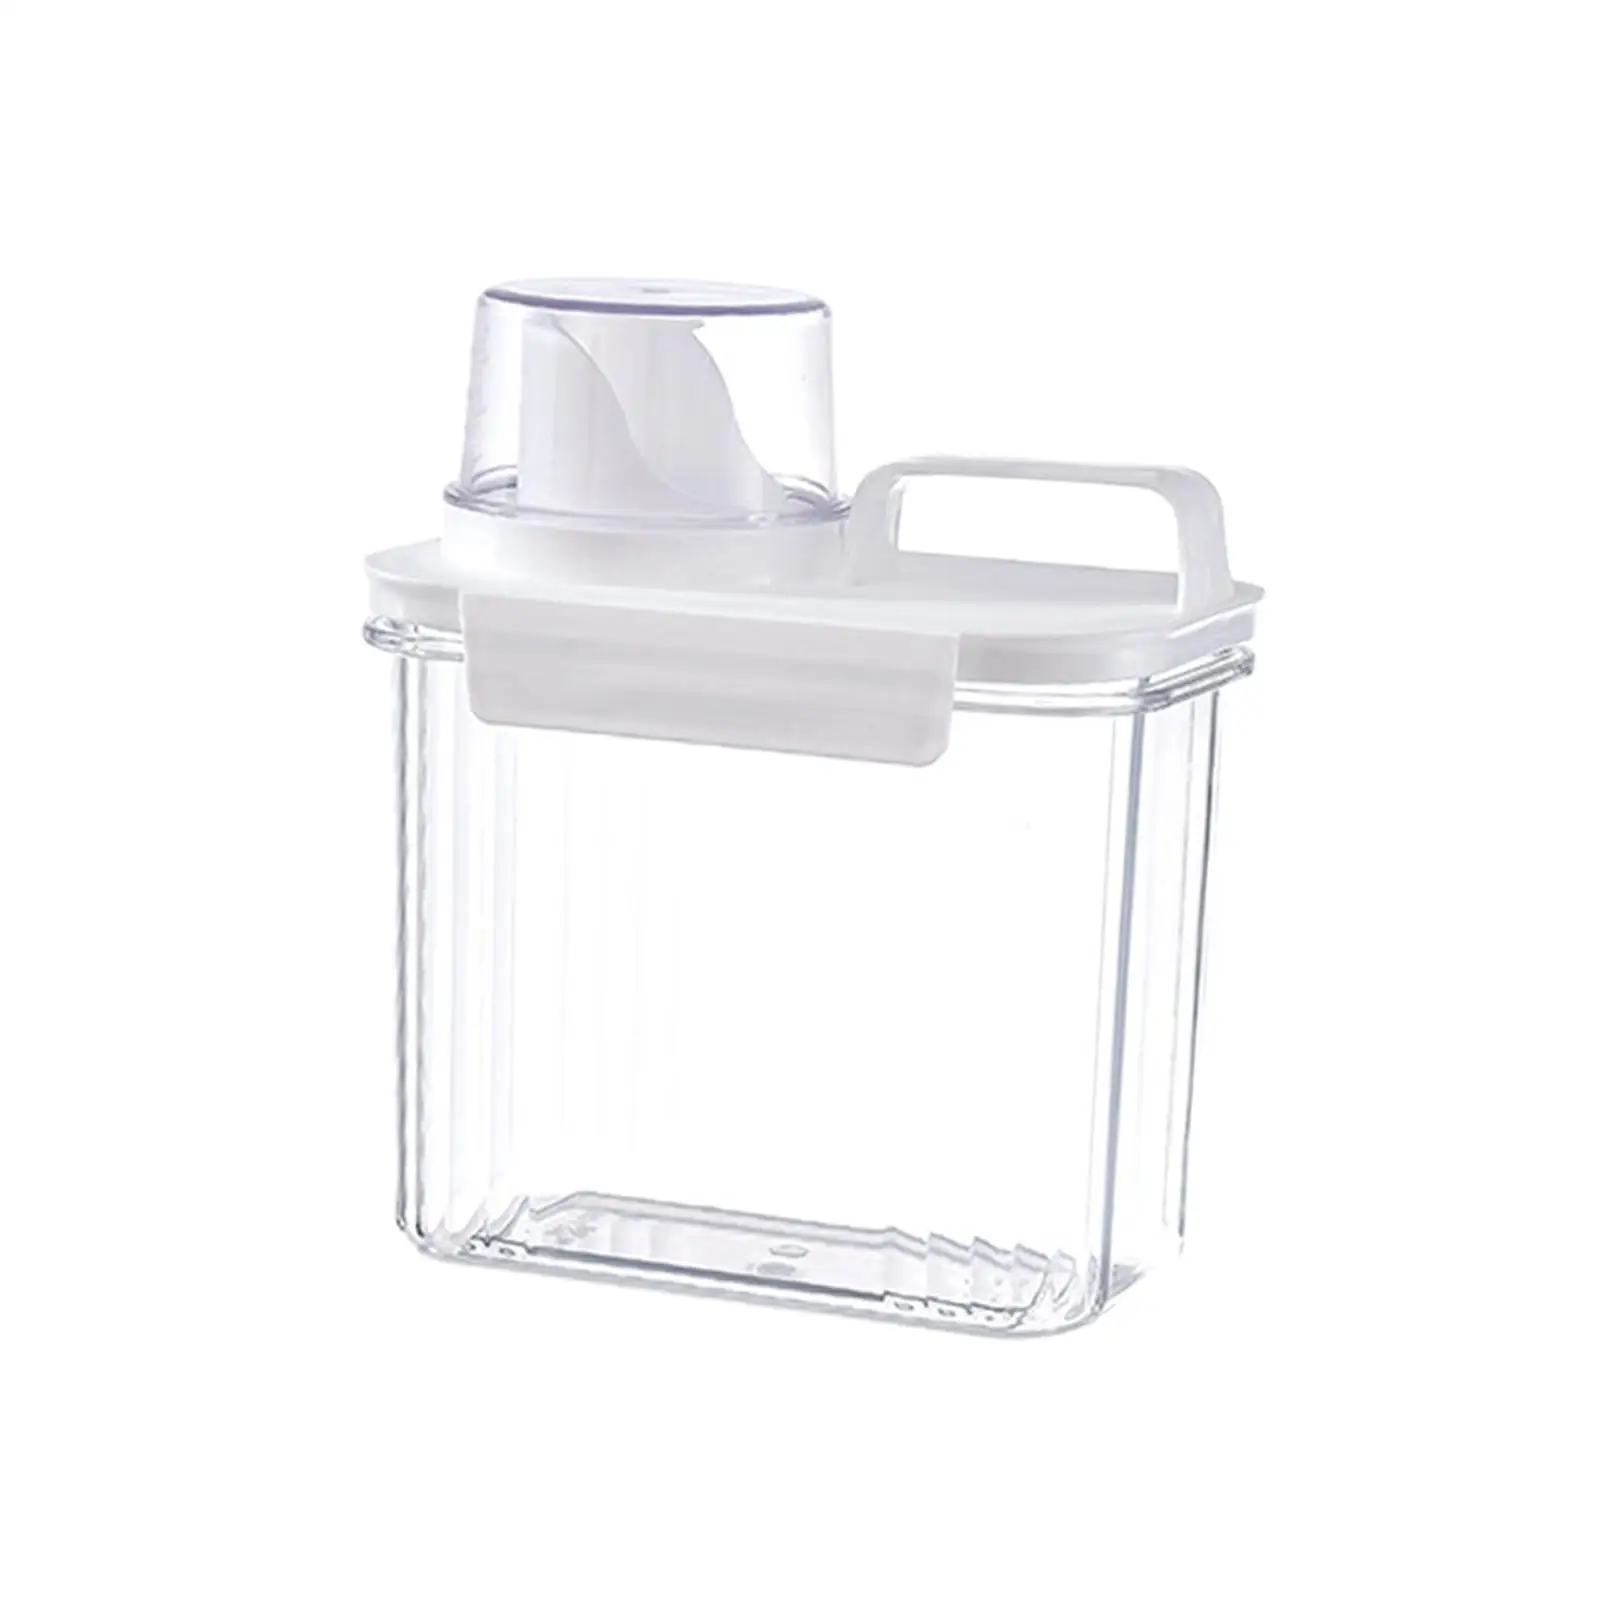 Laundry Powder Containers Liquid Laundry Soap Dispenser Airtight Storage Box with Lid Household Laundry Container for Kitchen